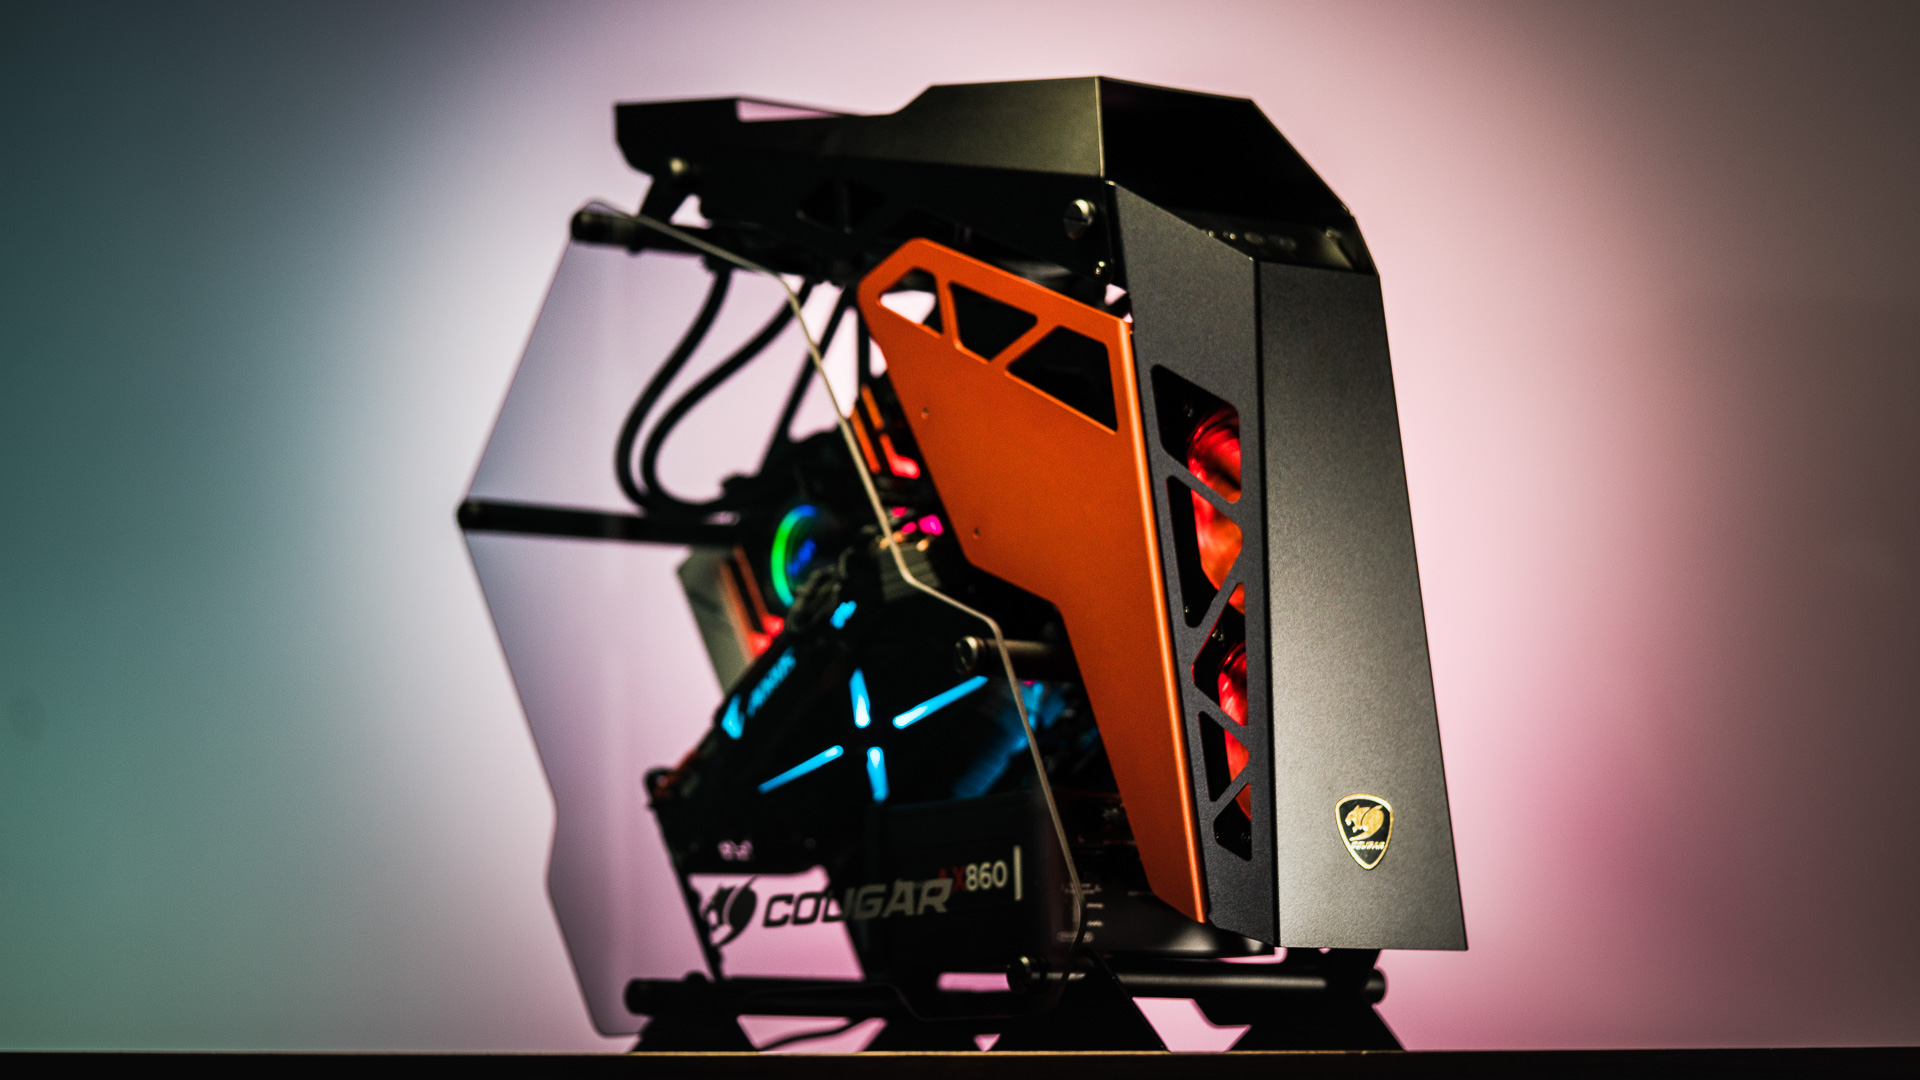 Building a Gaming PC the First Time? This Guide Can